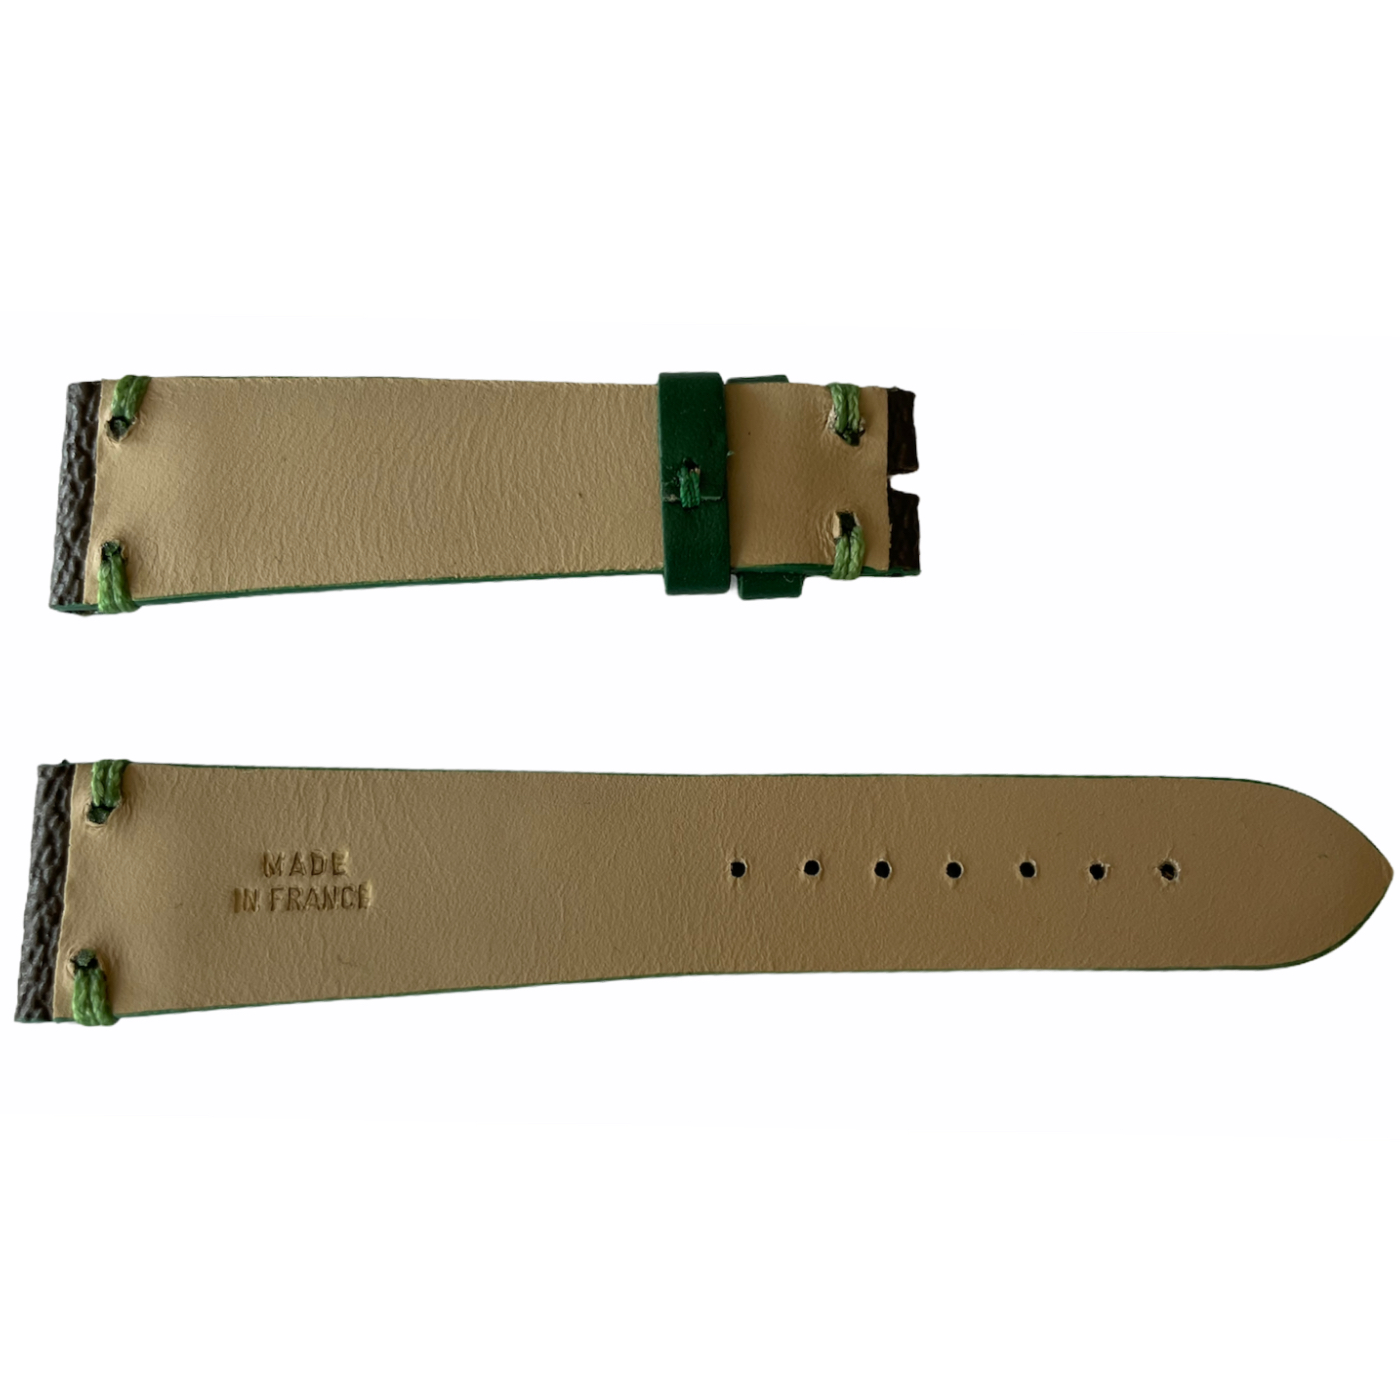 LOUIS VUITTON Green Padded Crocodile Leather Watch Strap